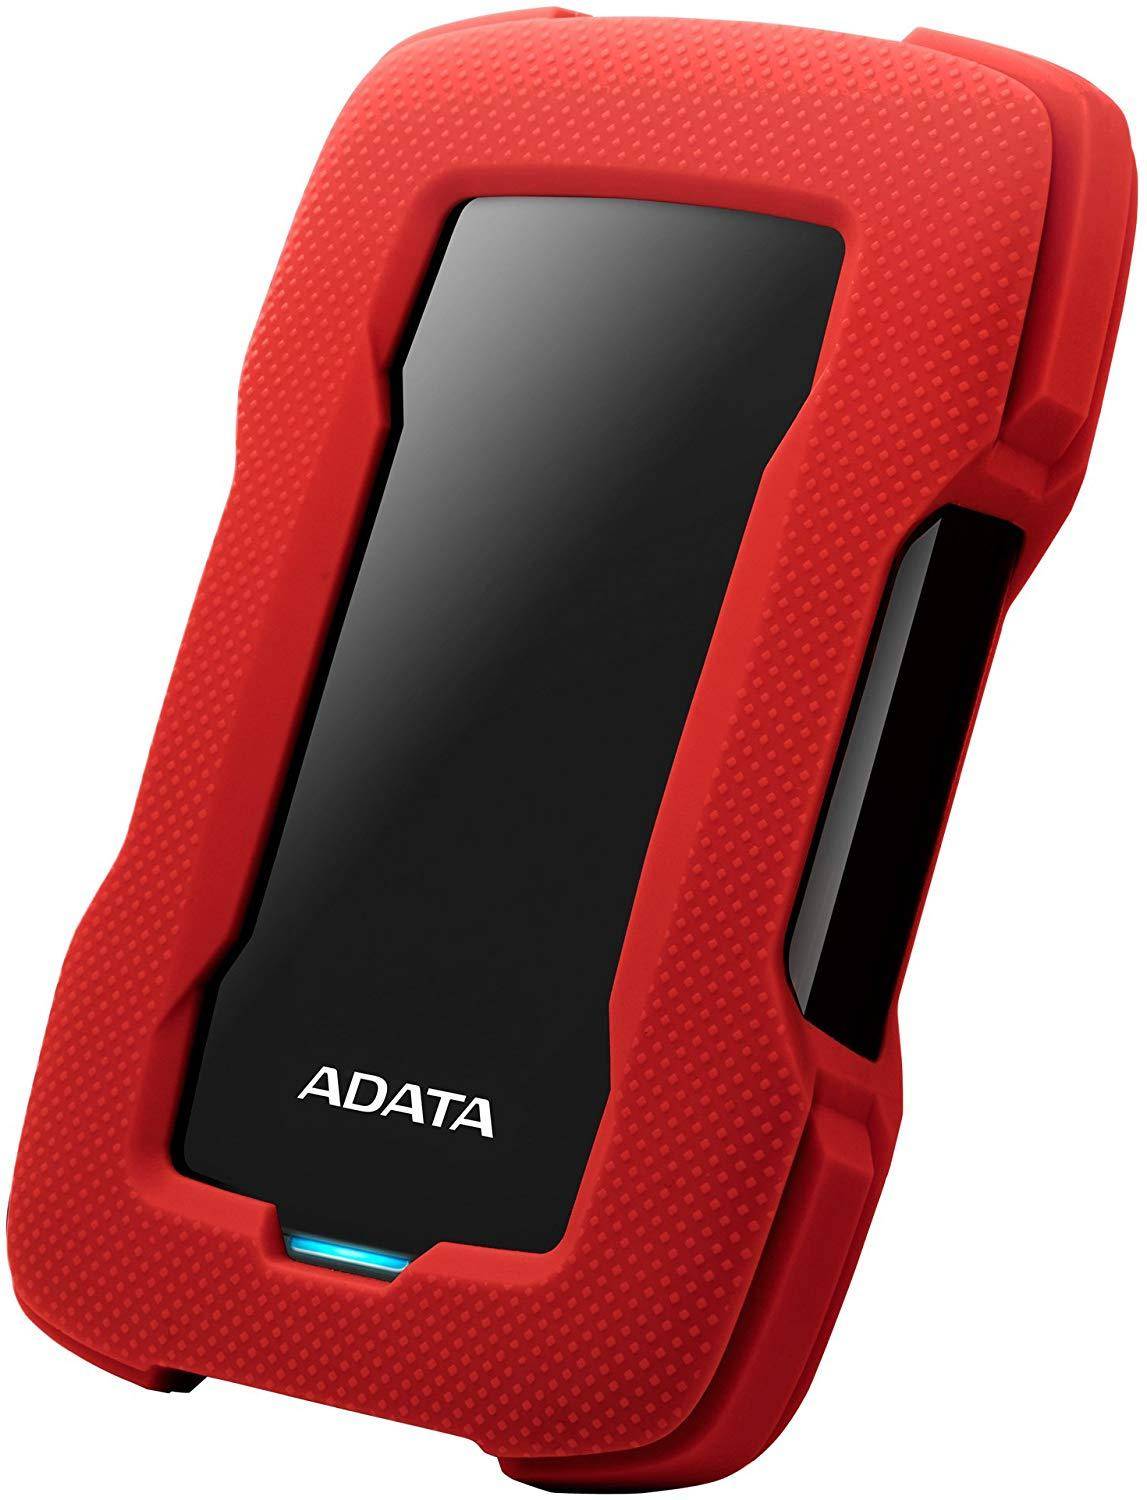 ADATA HD330 1TB External Hard Drive with AES-256 Encryption zoom image